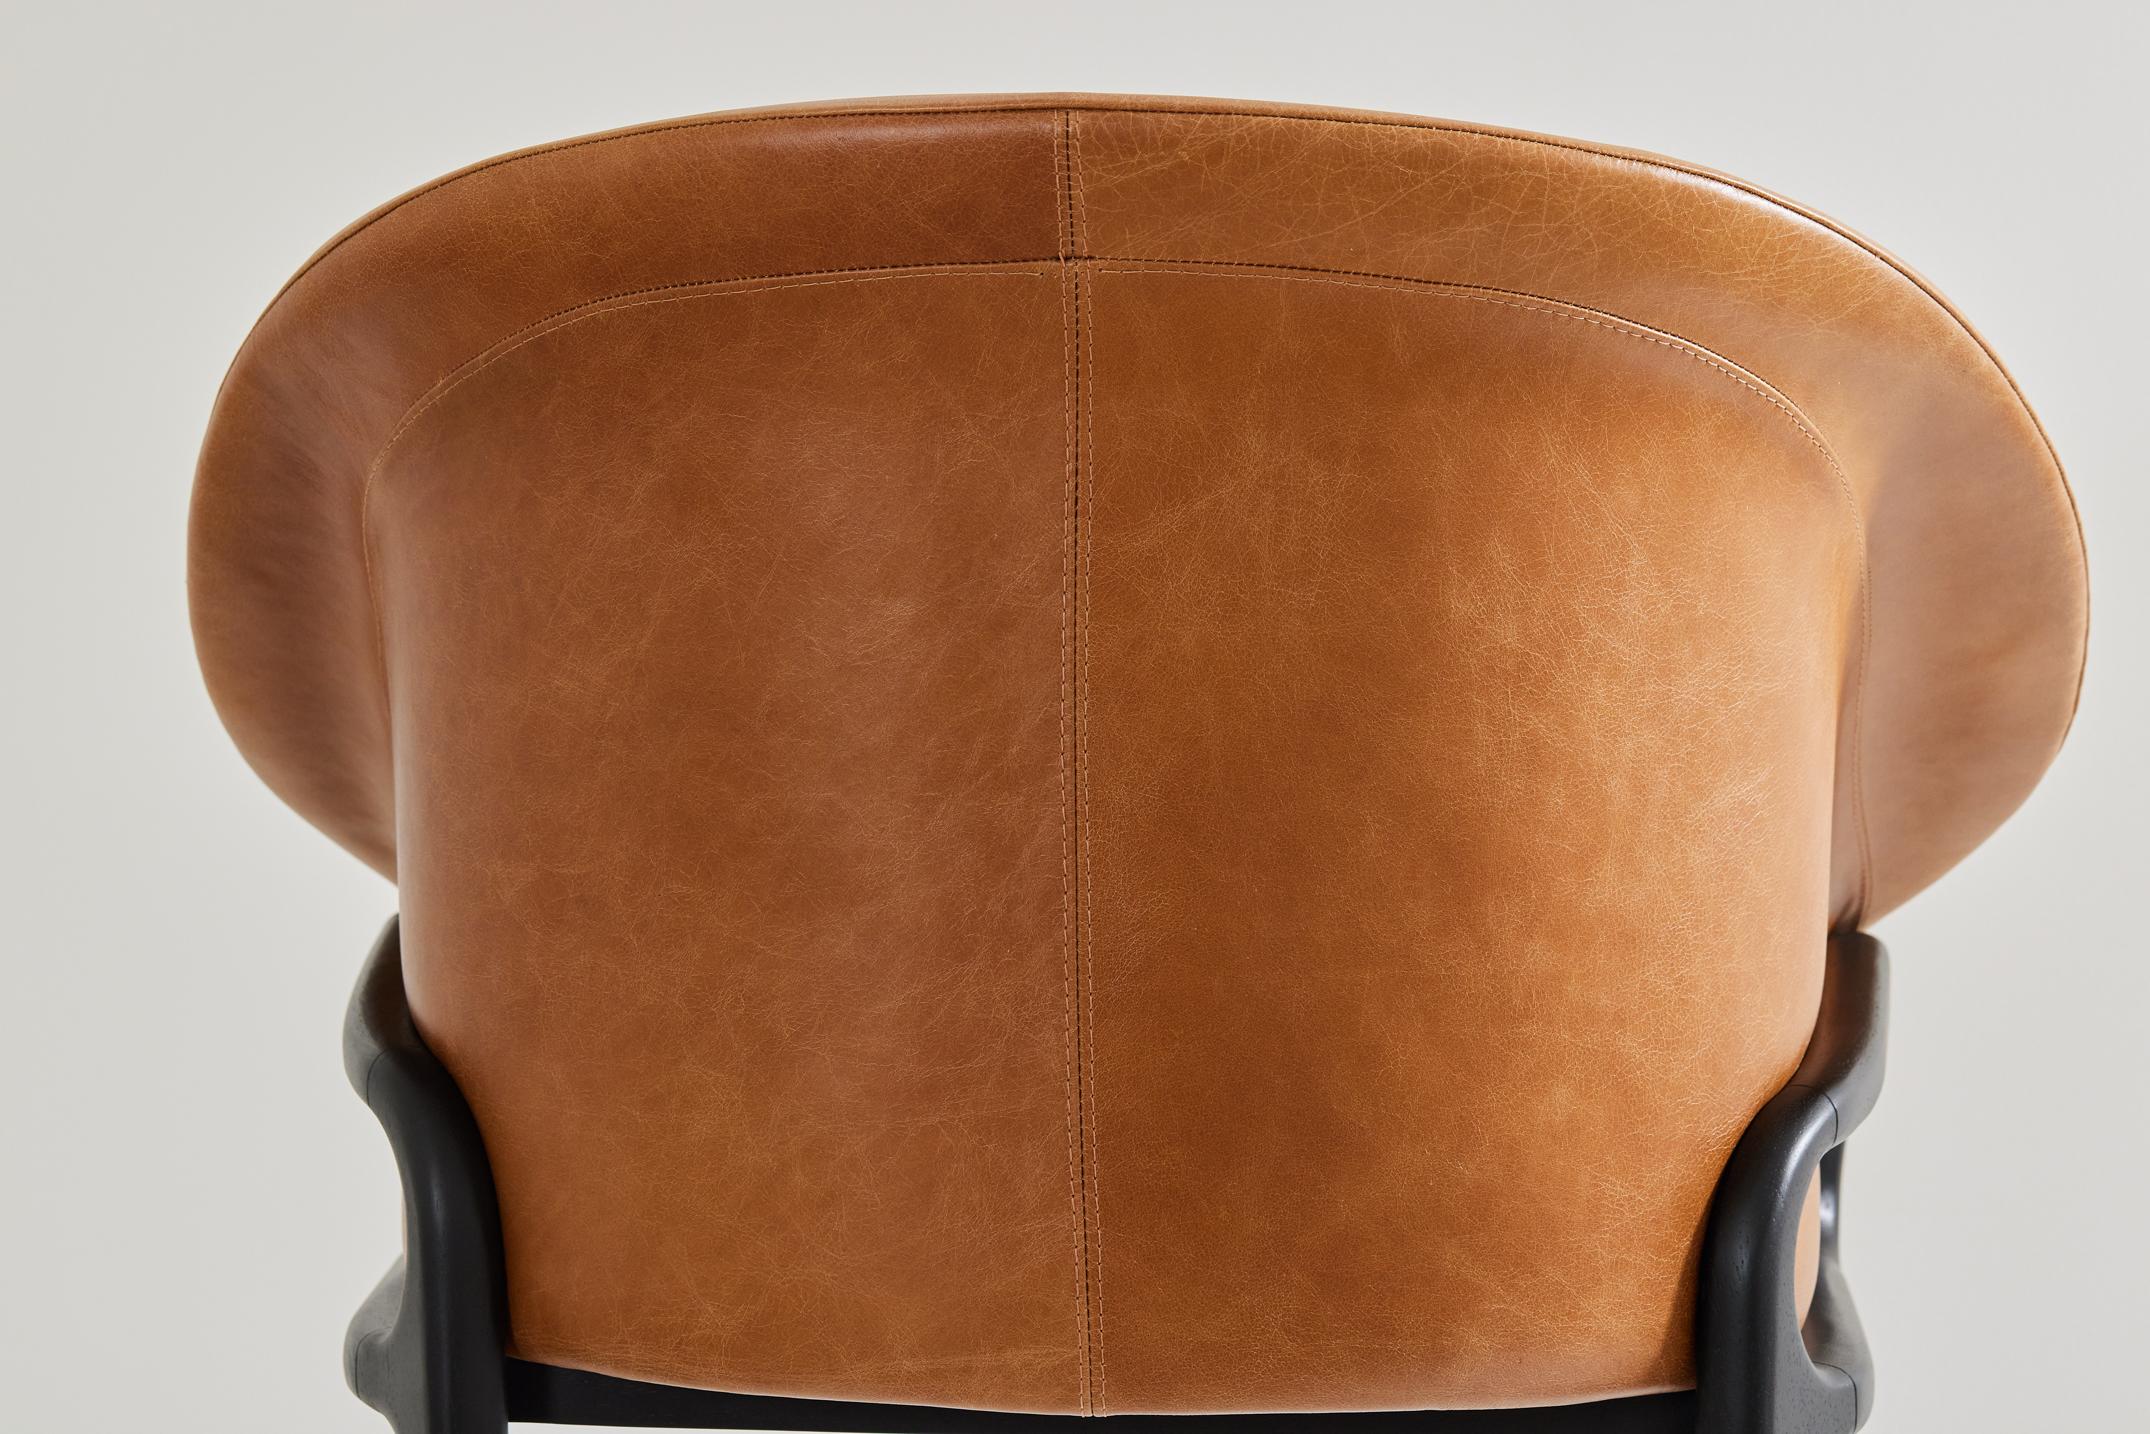 Leather Minimalist Organic Chair in black Solid Wood, camel leather Seating tone For Sale